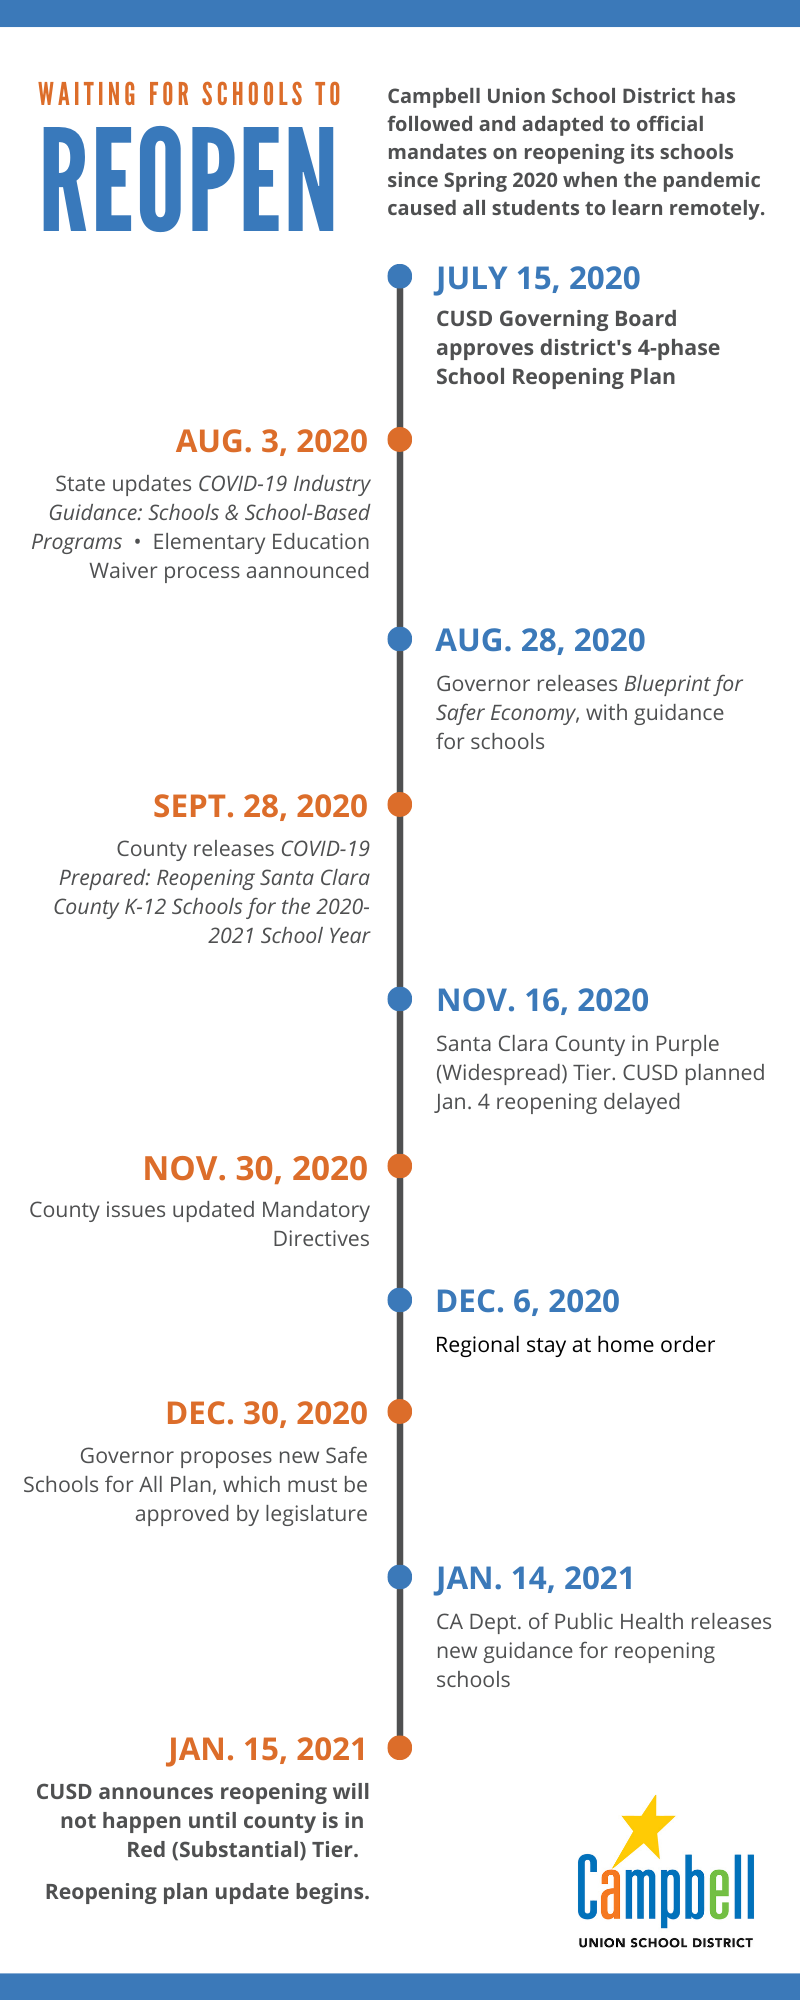 timeline of state and county updates